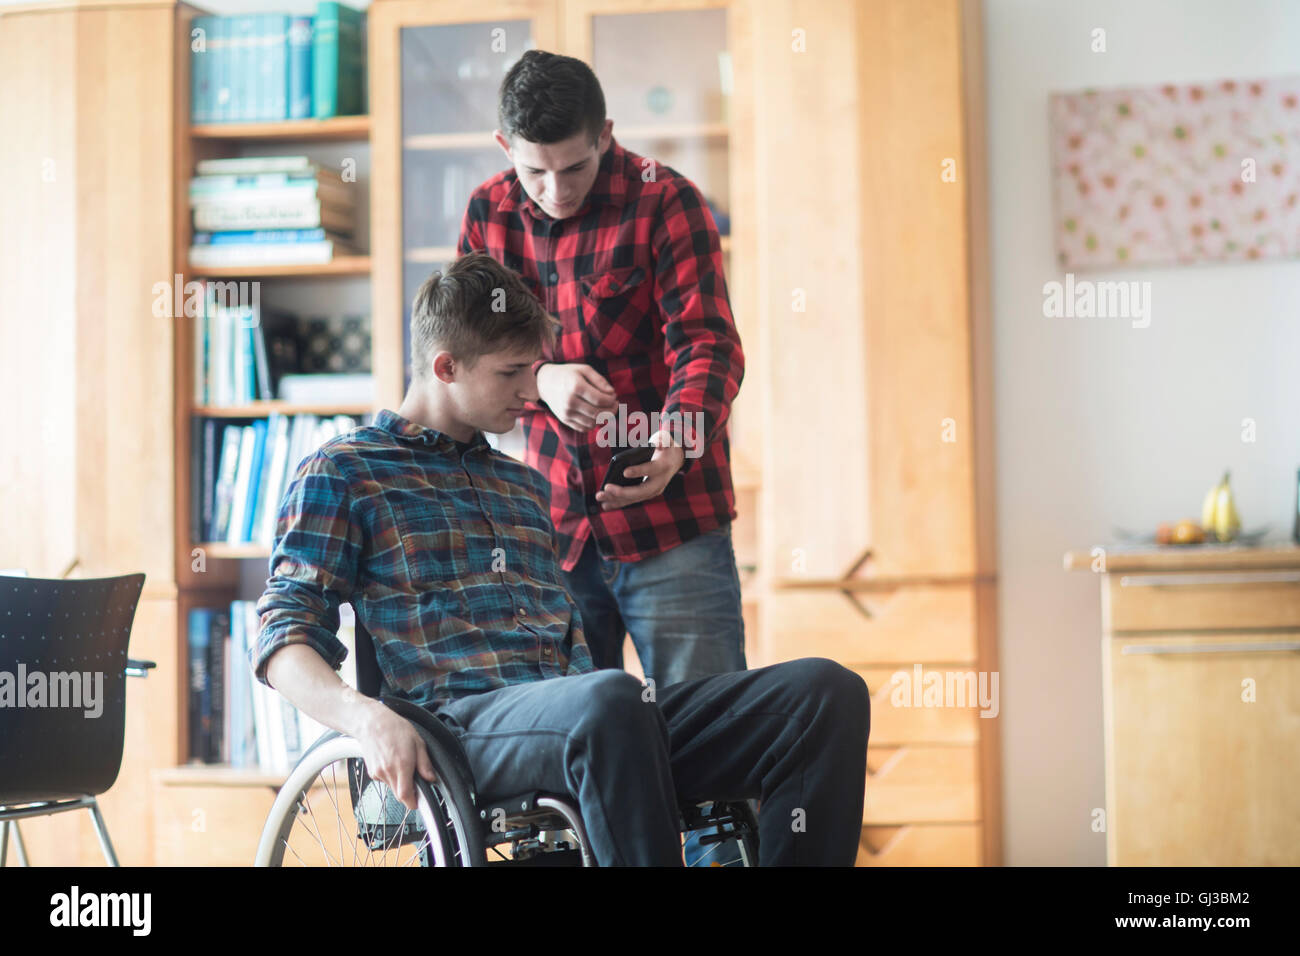 Young man using wheelchair reading smartphone texts with friend in kitchen Stock Photo